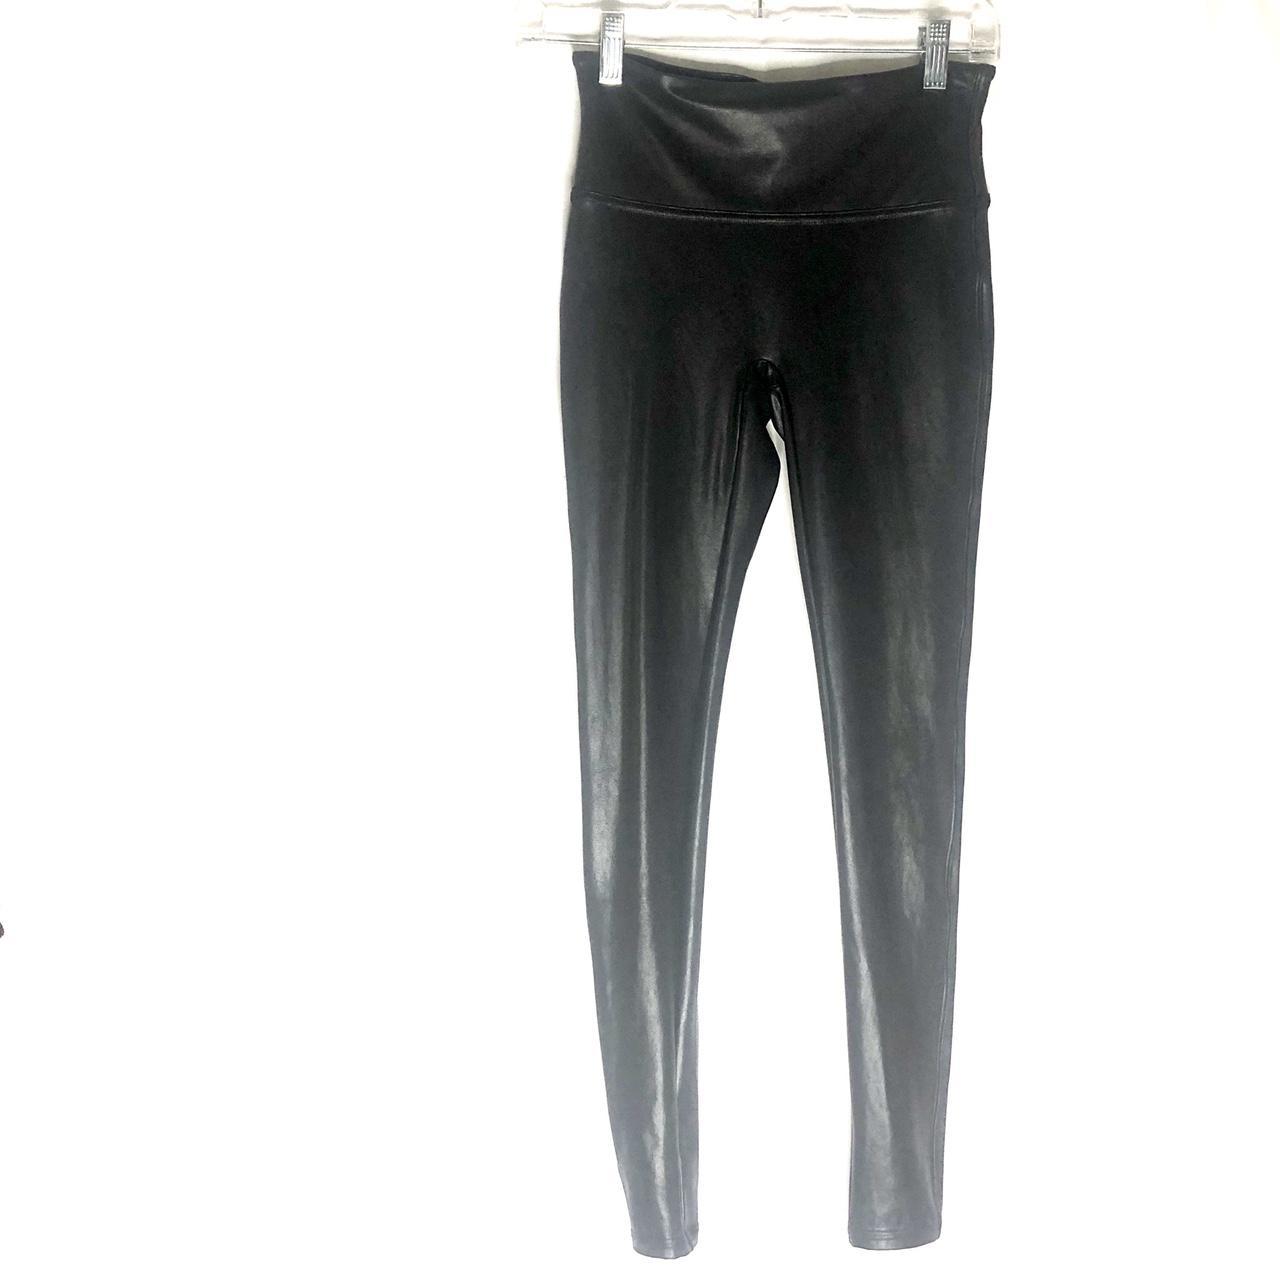 Product Image 3 - NWOT Spanx Faux-Leather Leggings

Features a